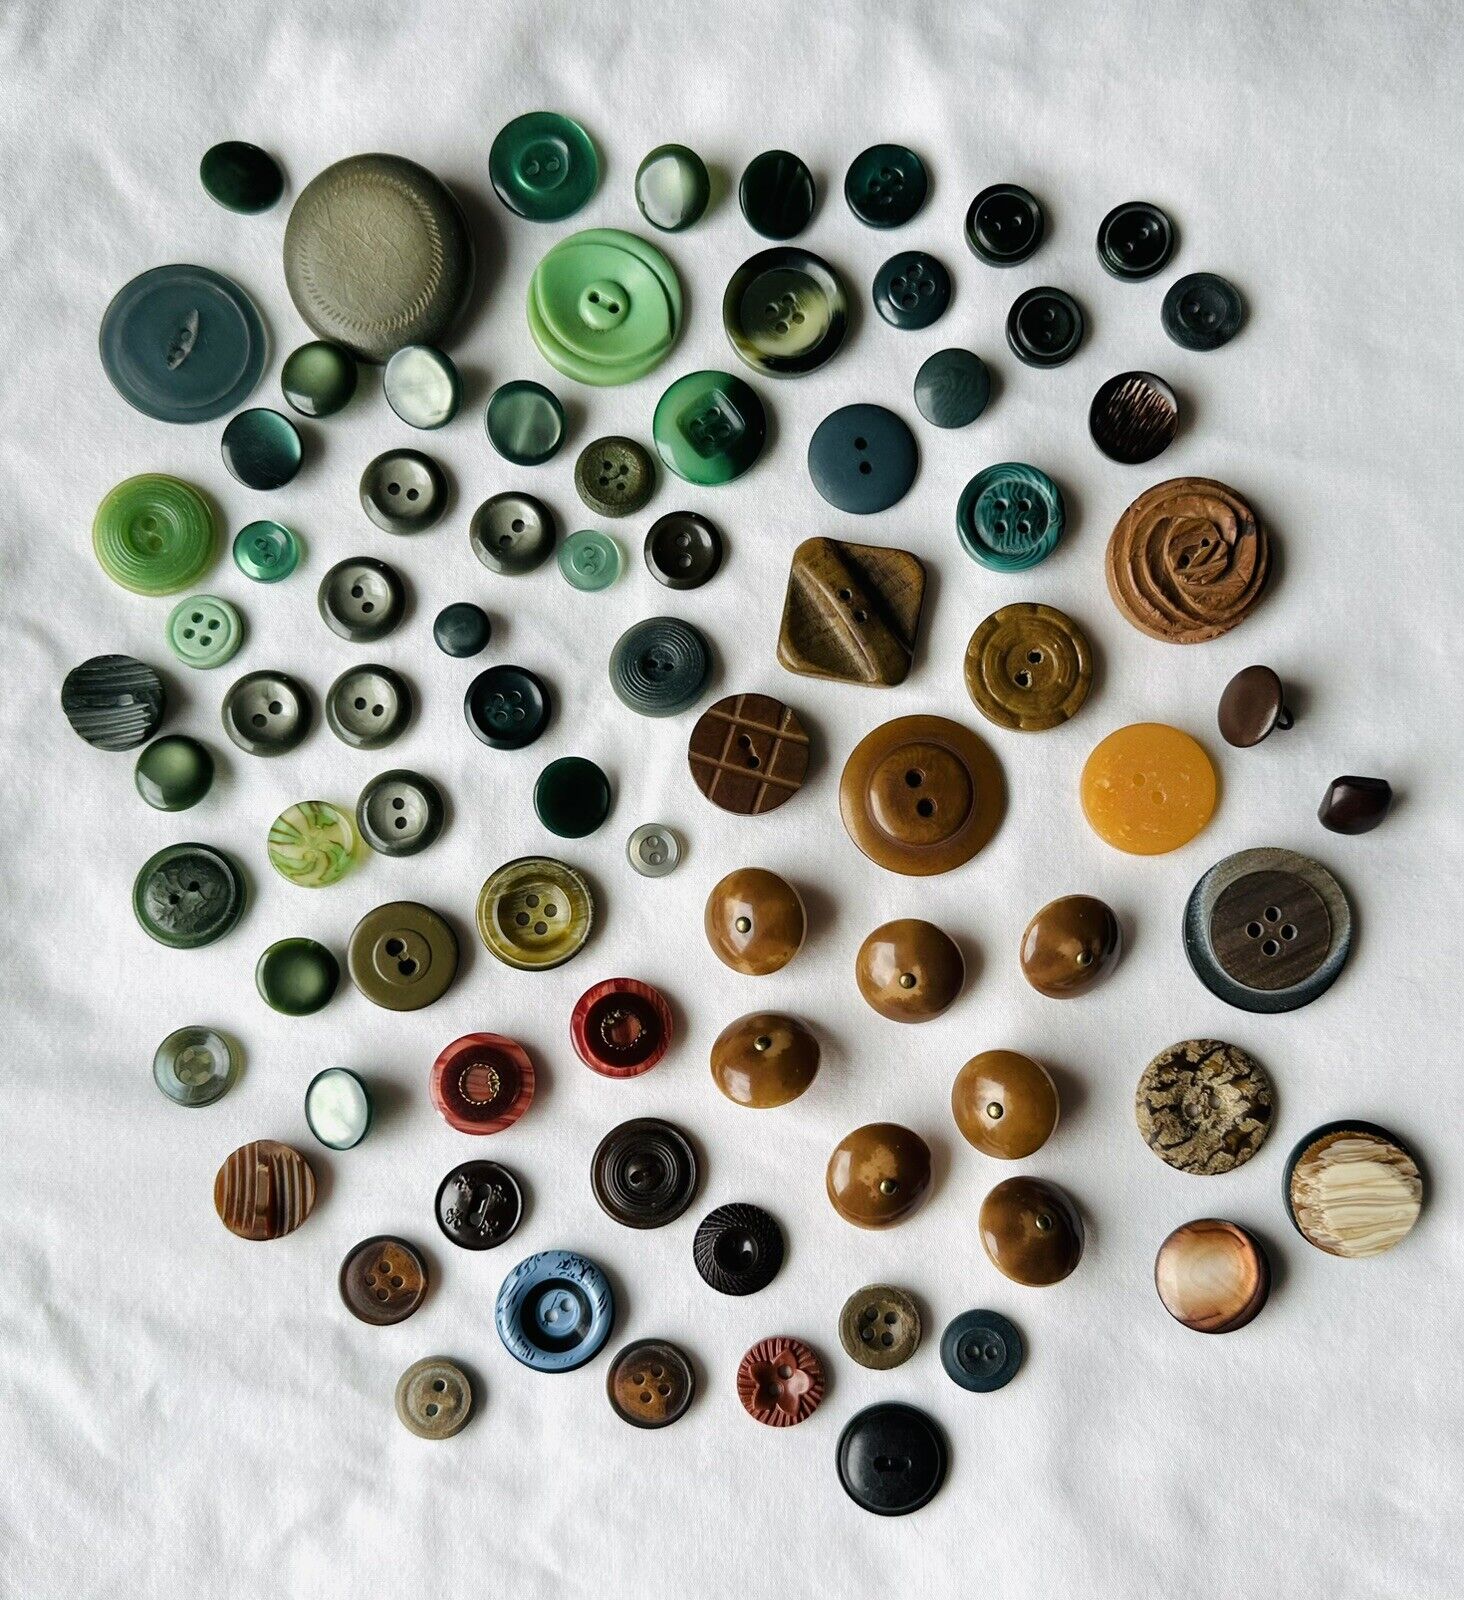 82 Vintage Buttons Greens &Browns Some From Early 1900’s